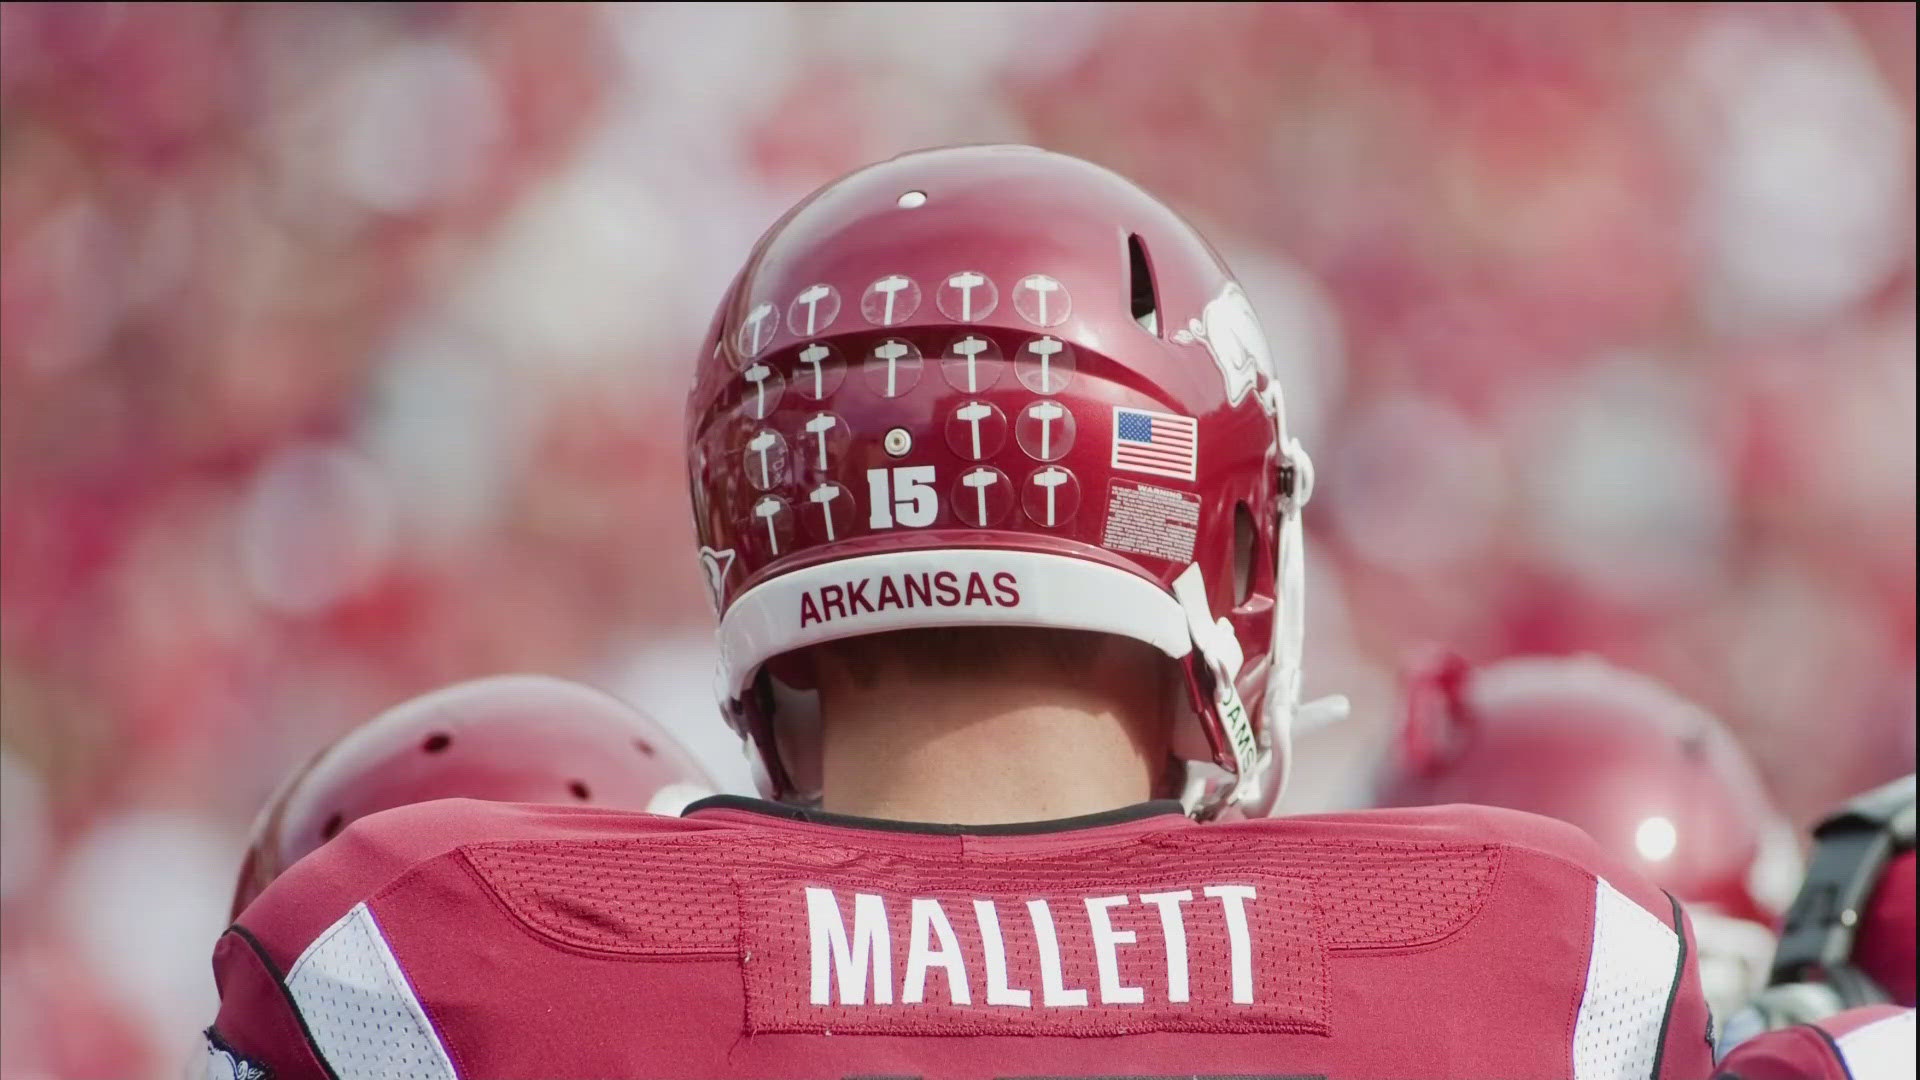 June 27, 2023, Ryan Mallett, a son, brother and Arkansas football legend passed away at the age of 35. Now, his family is making sure his legacy lives on.